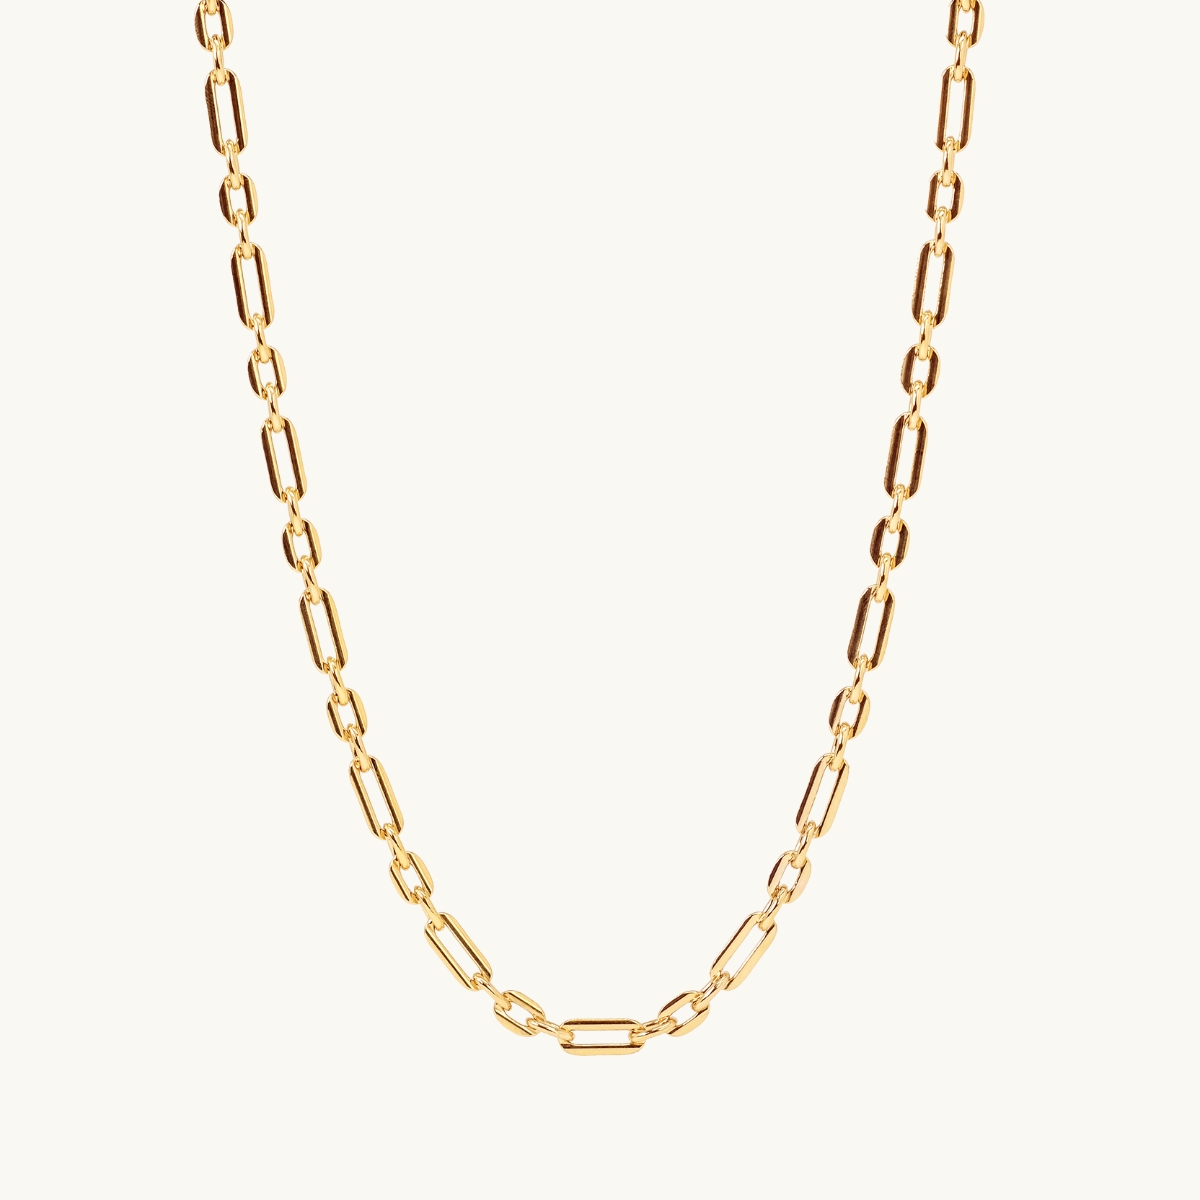 Chunky necklace chain in gold plated silver